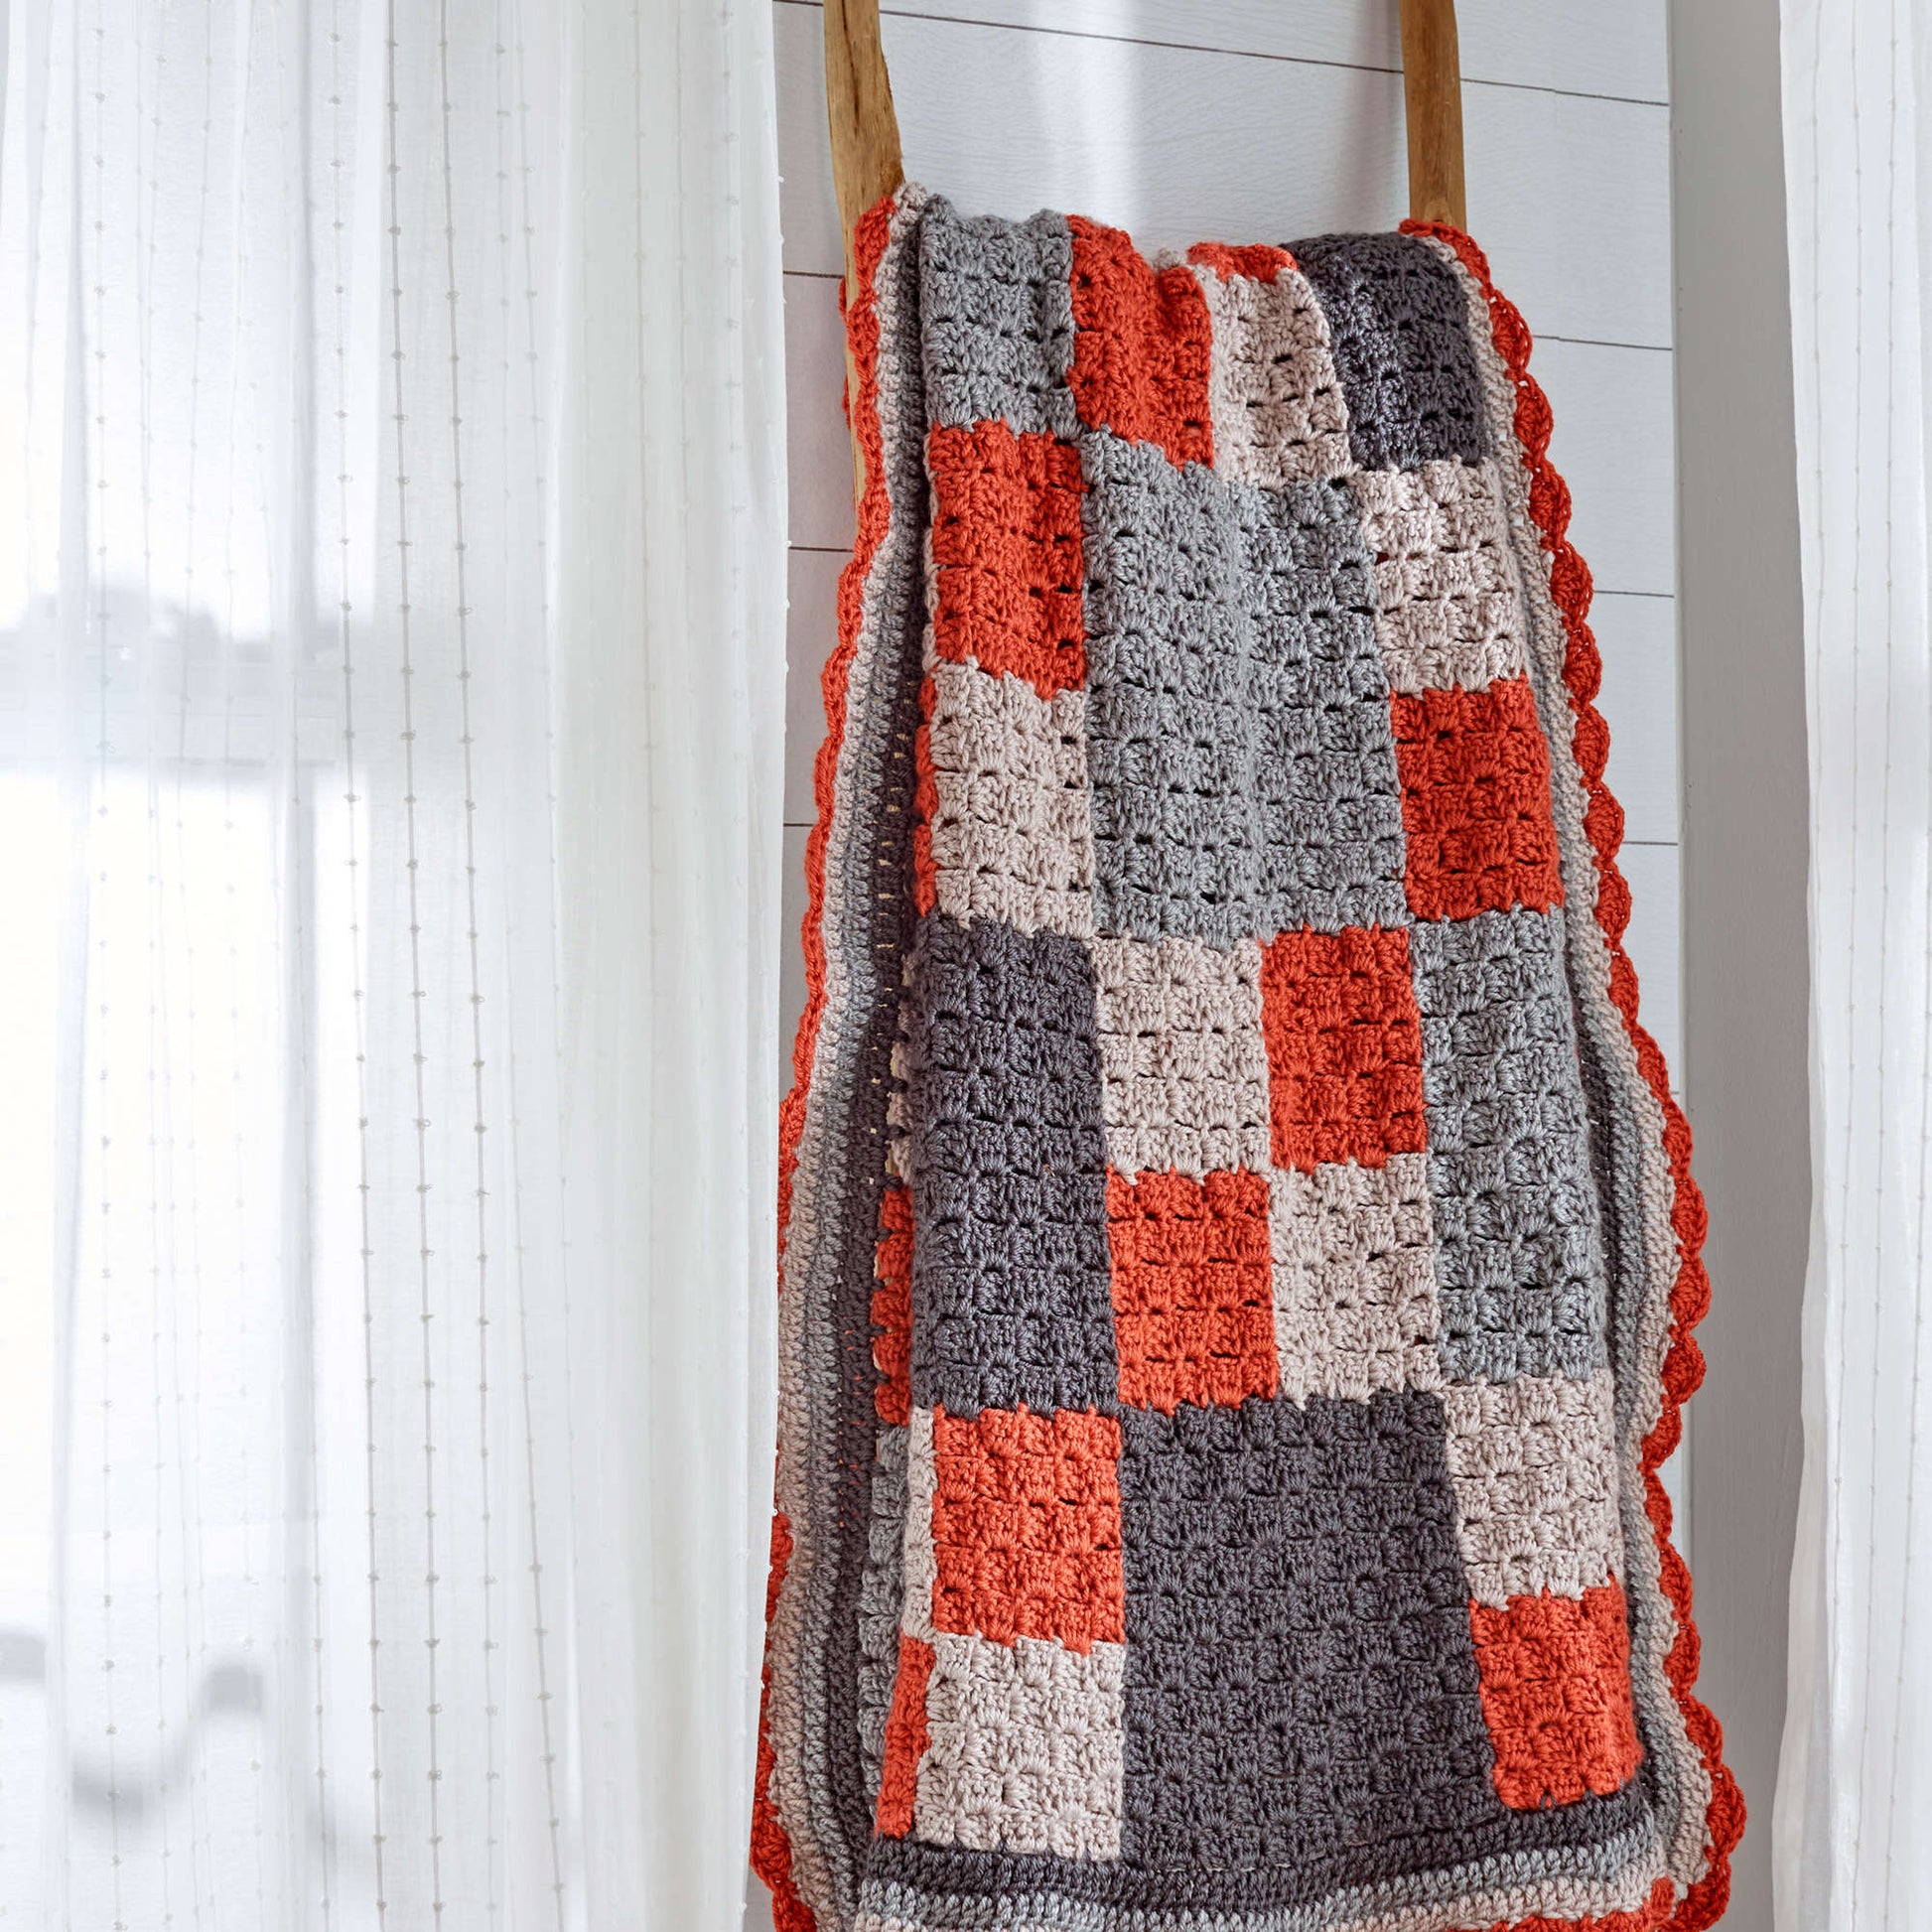 Free Red Heart Four-Patch Throw Pattern